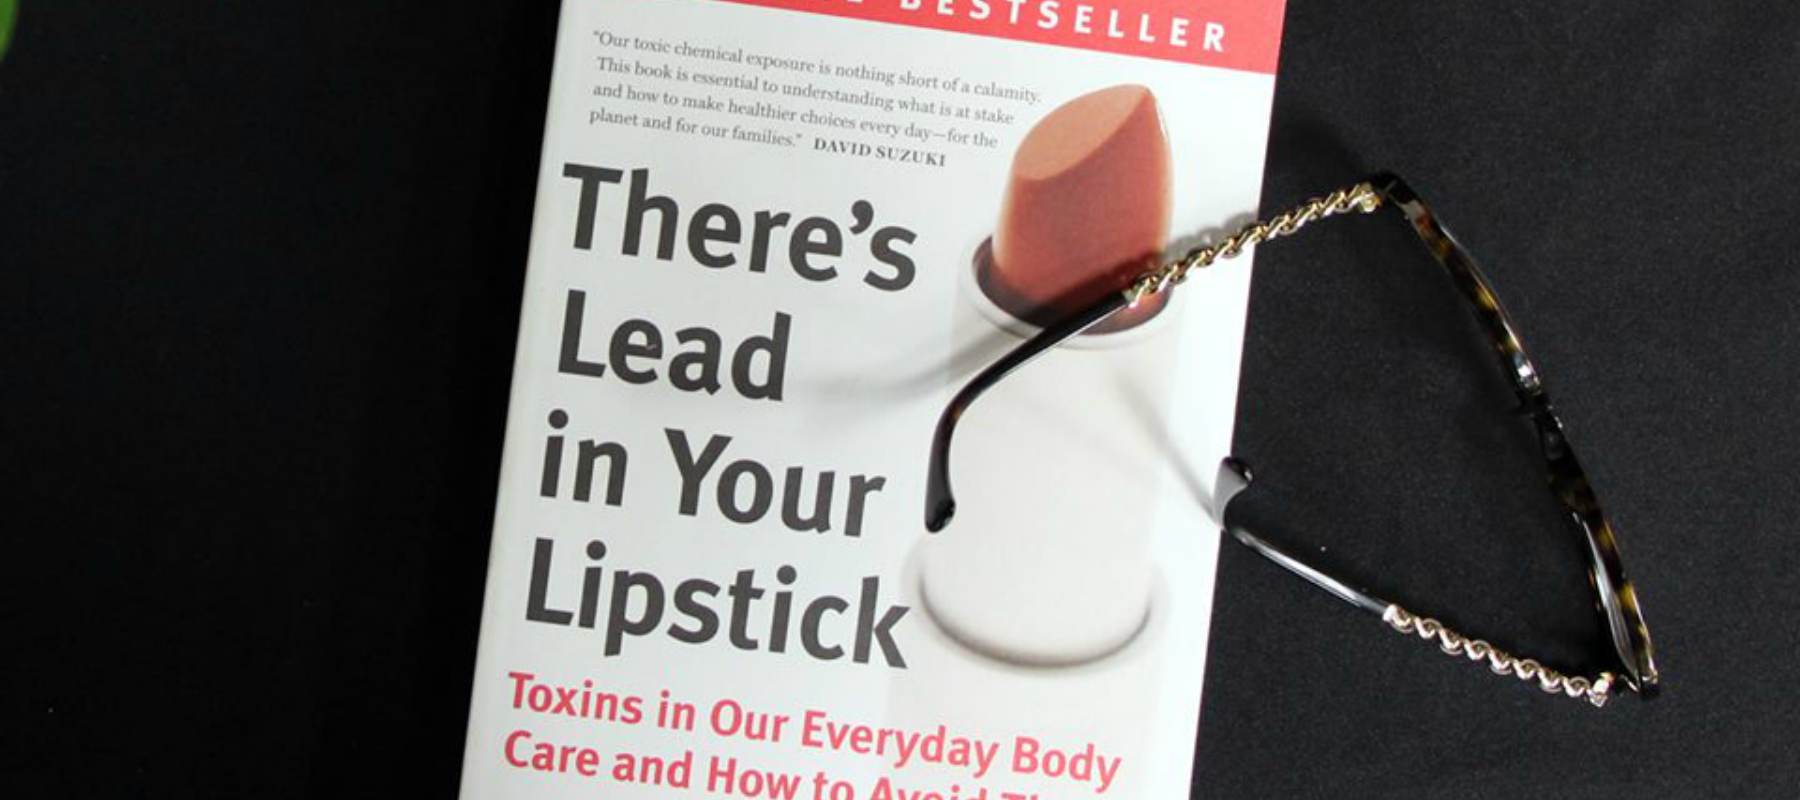 there's-lead-in-your-lipstick-book